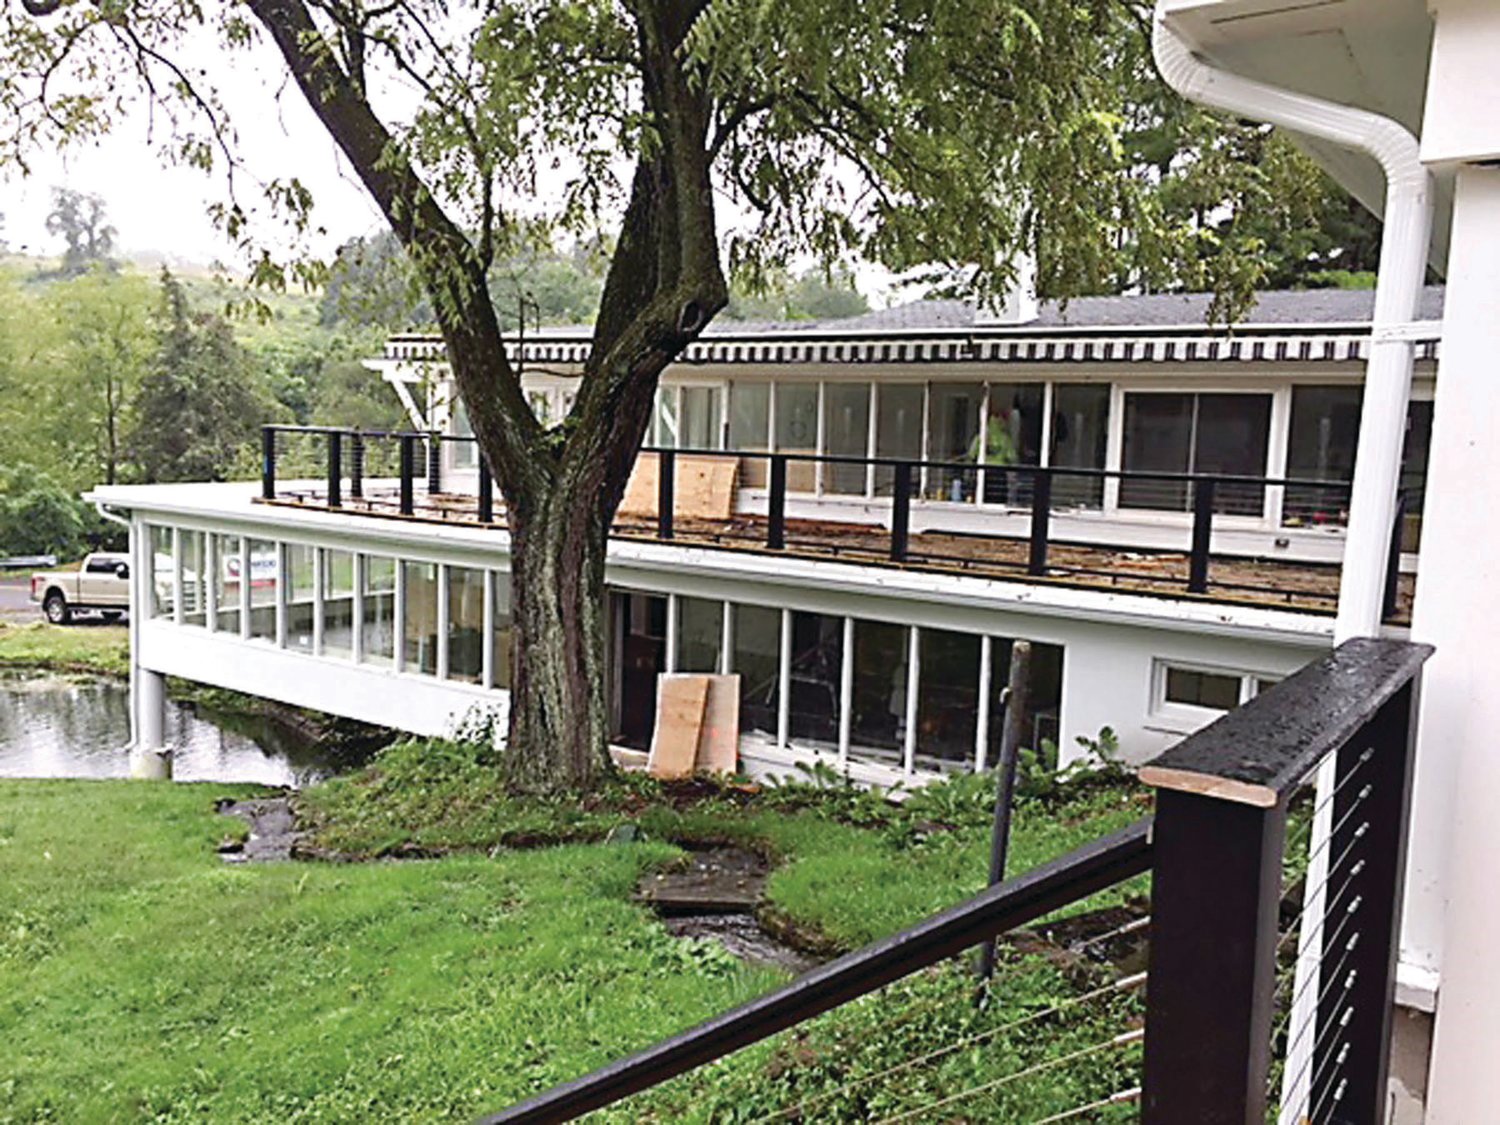 Durham Springs has been purchased by a new owner and will become a wedding venue.